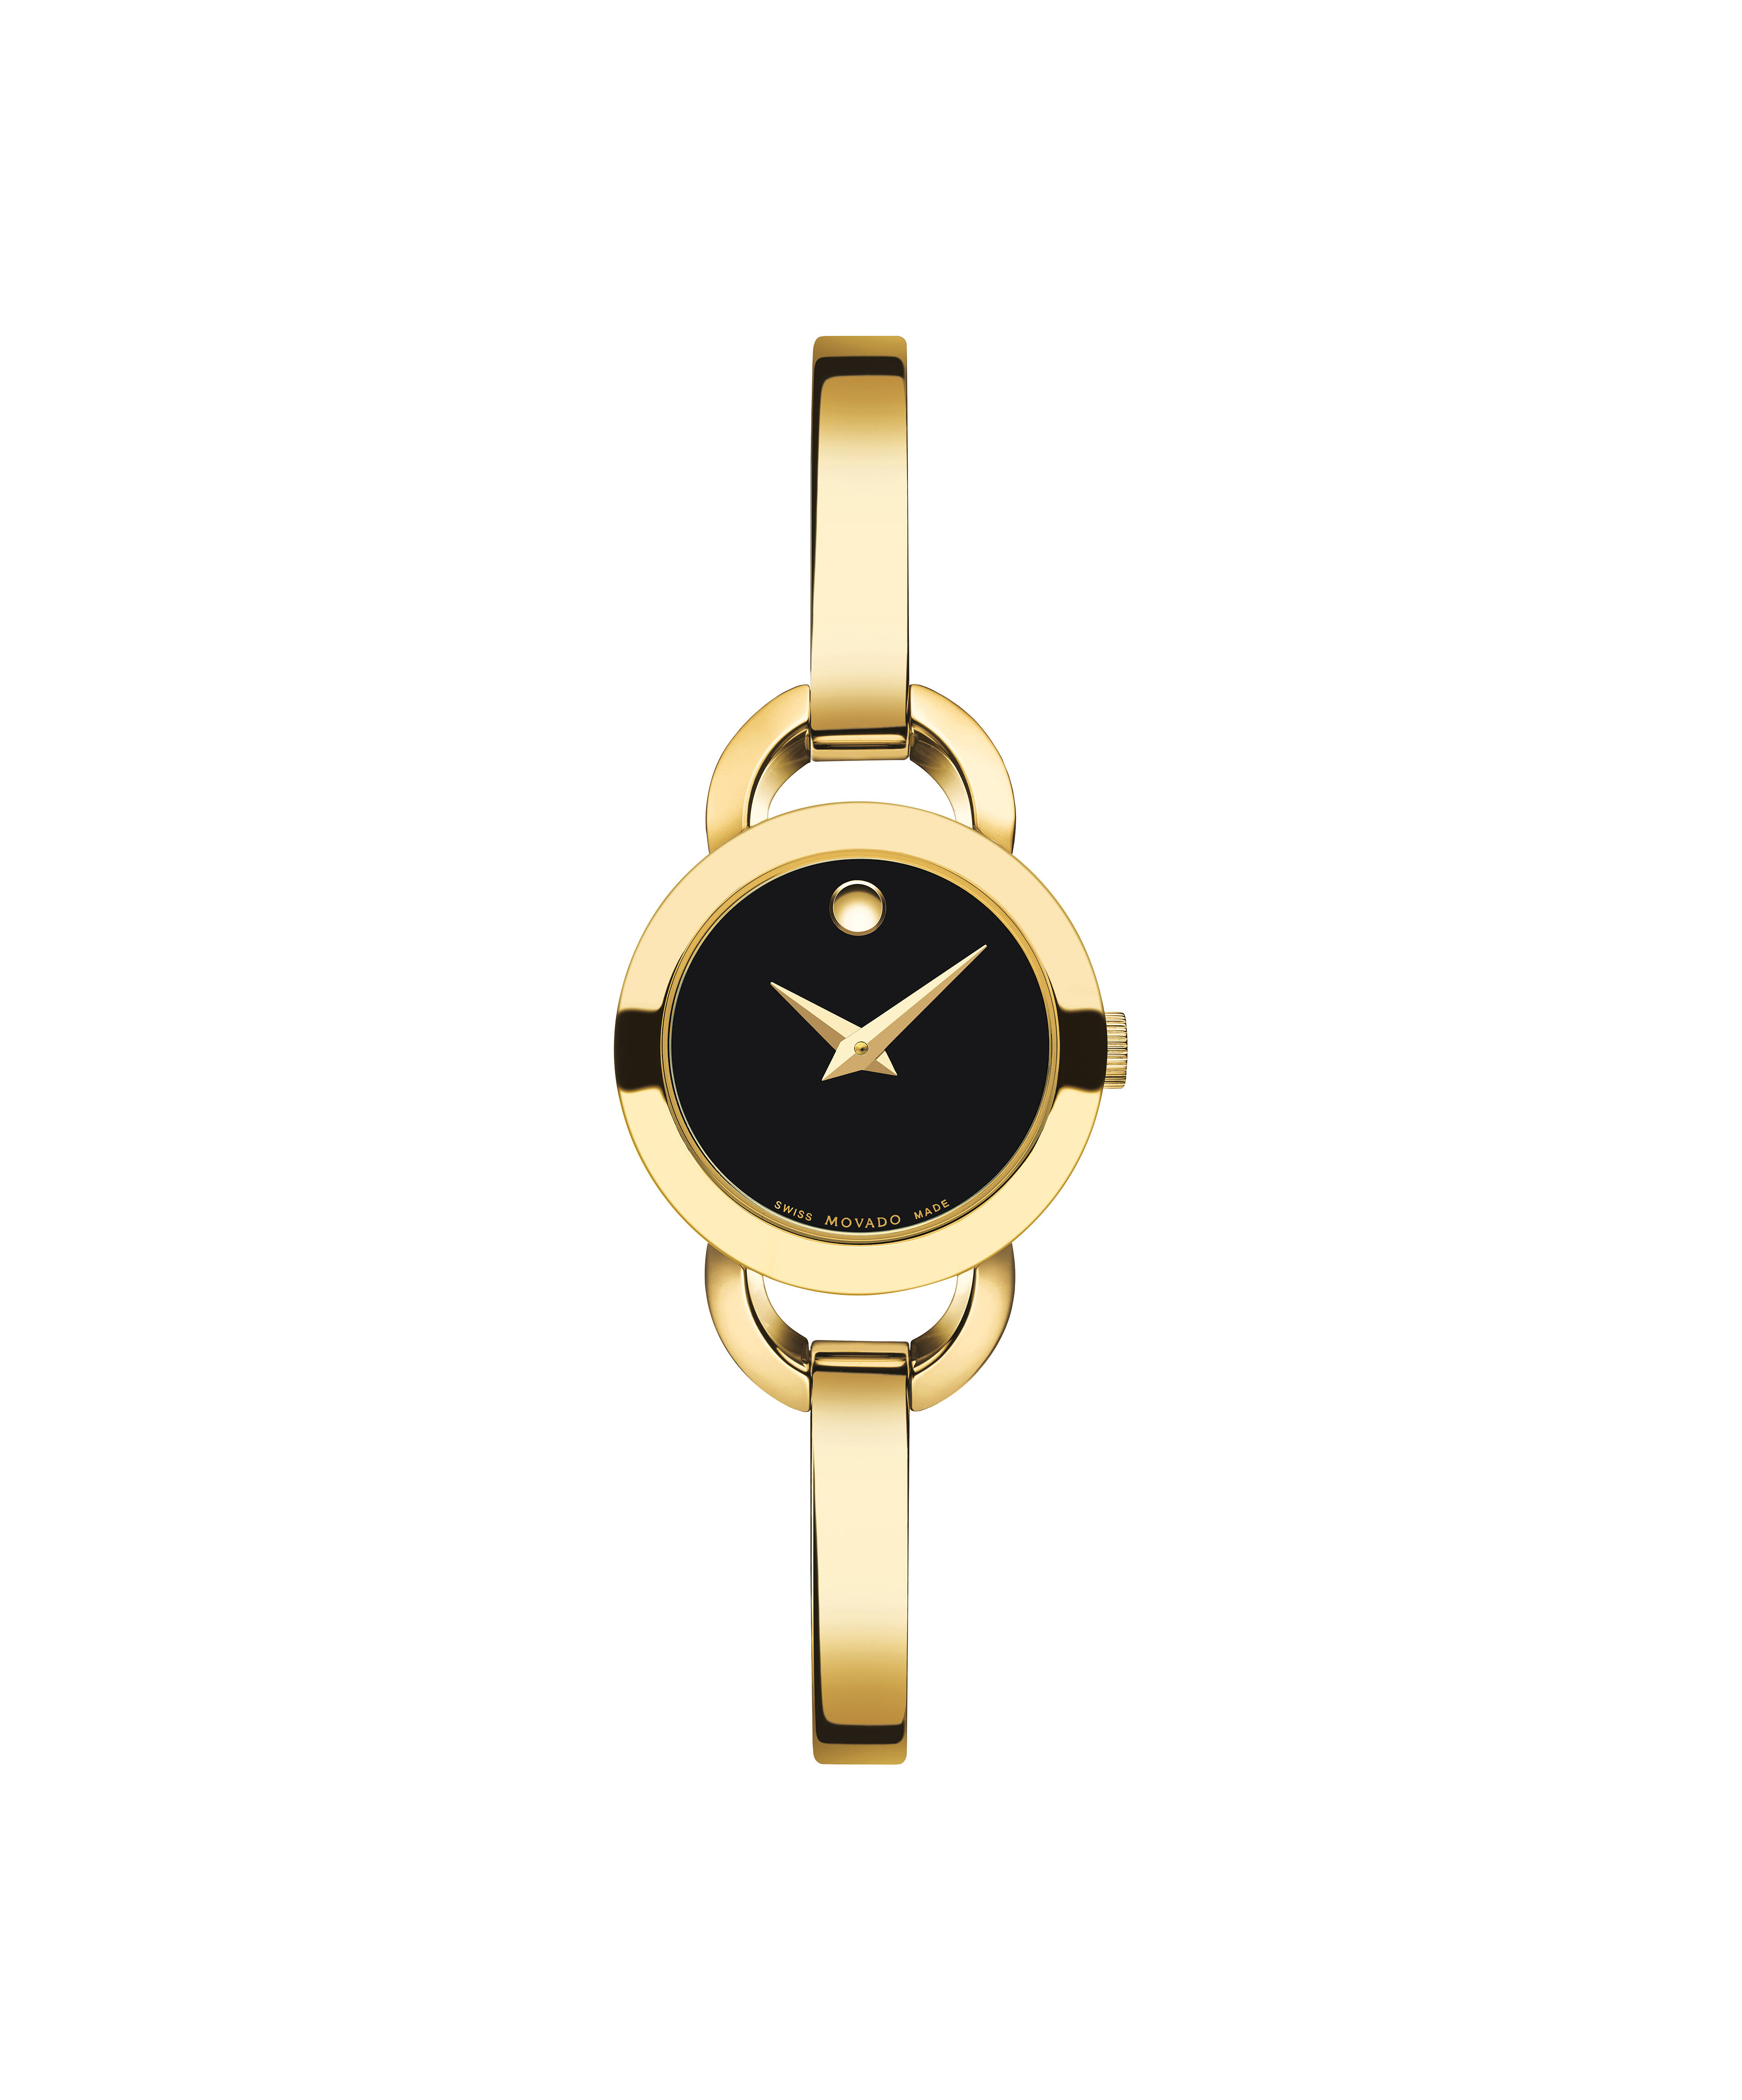 Movado Ultra Slim Yellow Gold Plated Leather Strap Women's Watch 0607157Movado VINTAGE